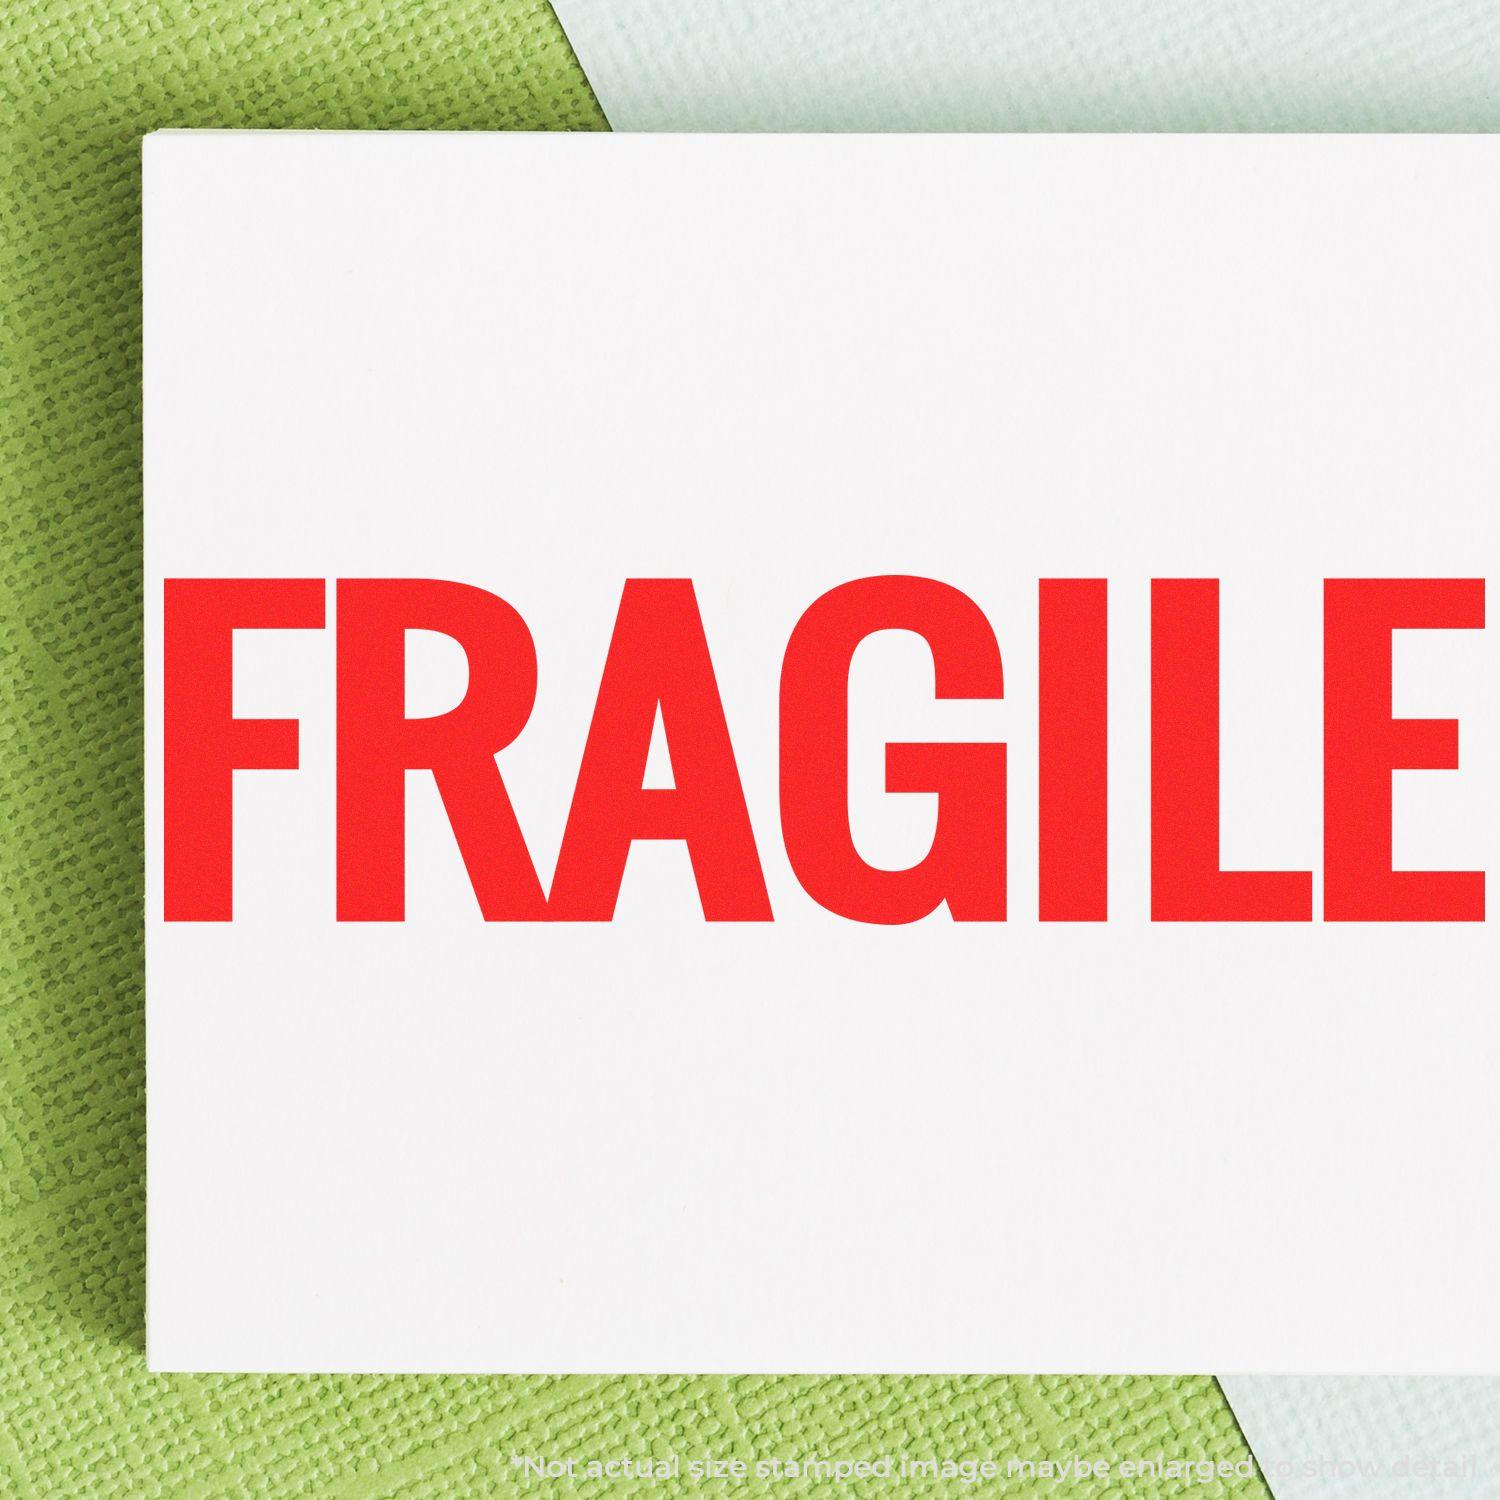 A self-inking stamp with a stamped image showing how the text "FRAGILE" in a large bold font is displayed after stamping.